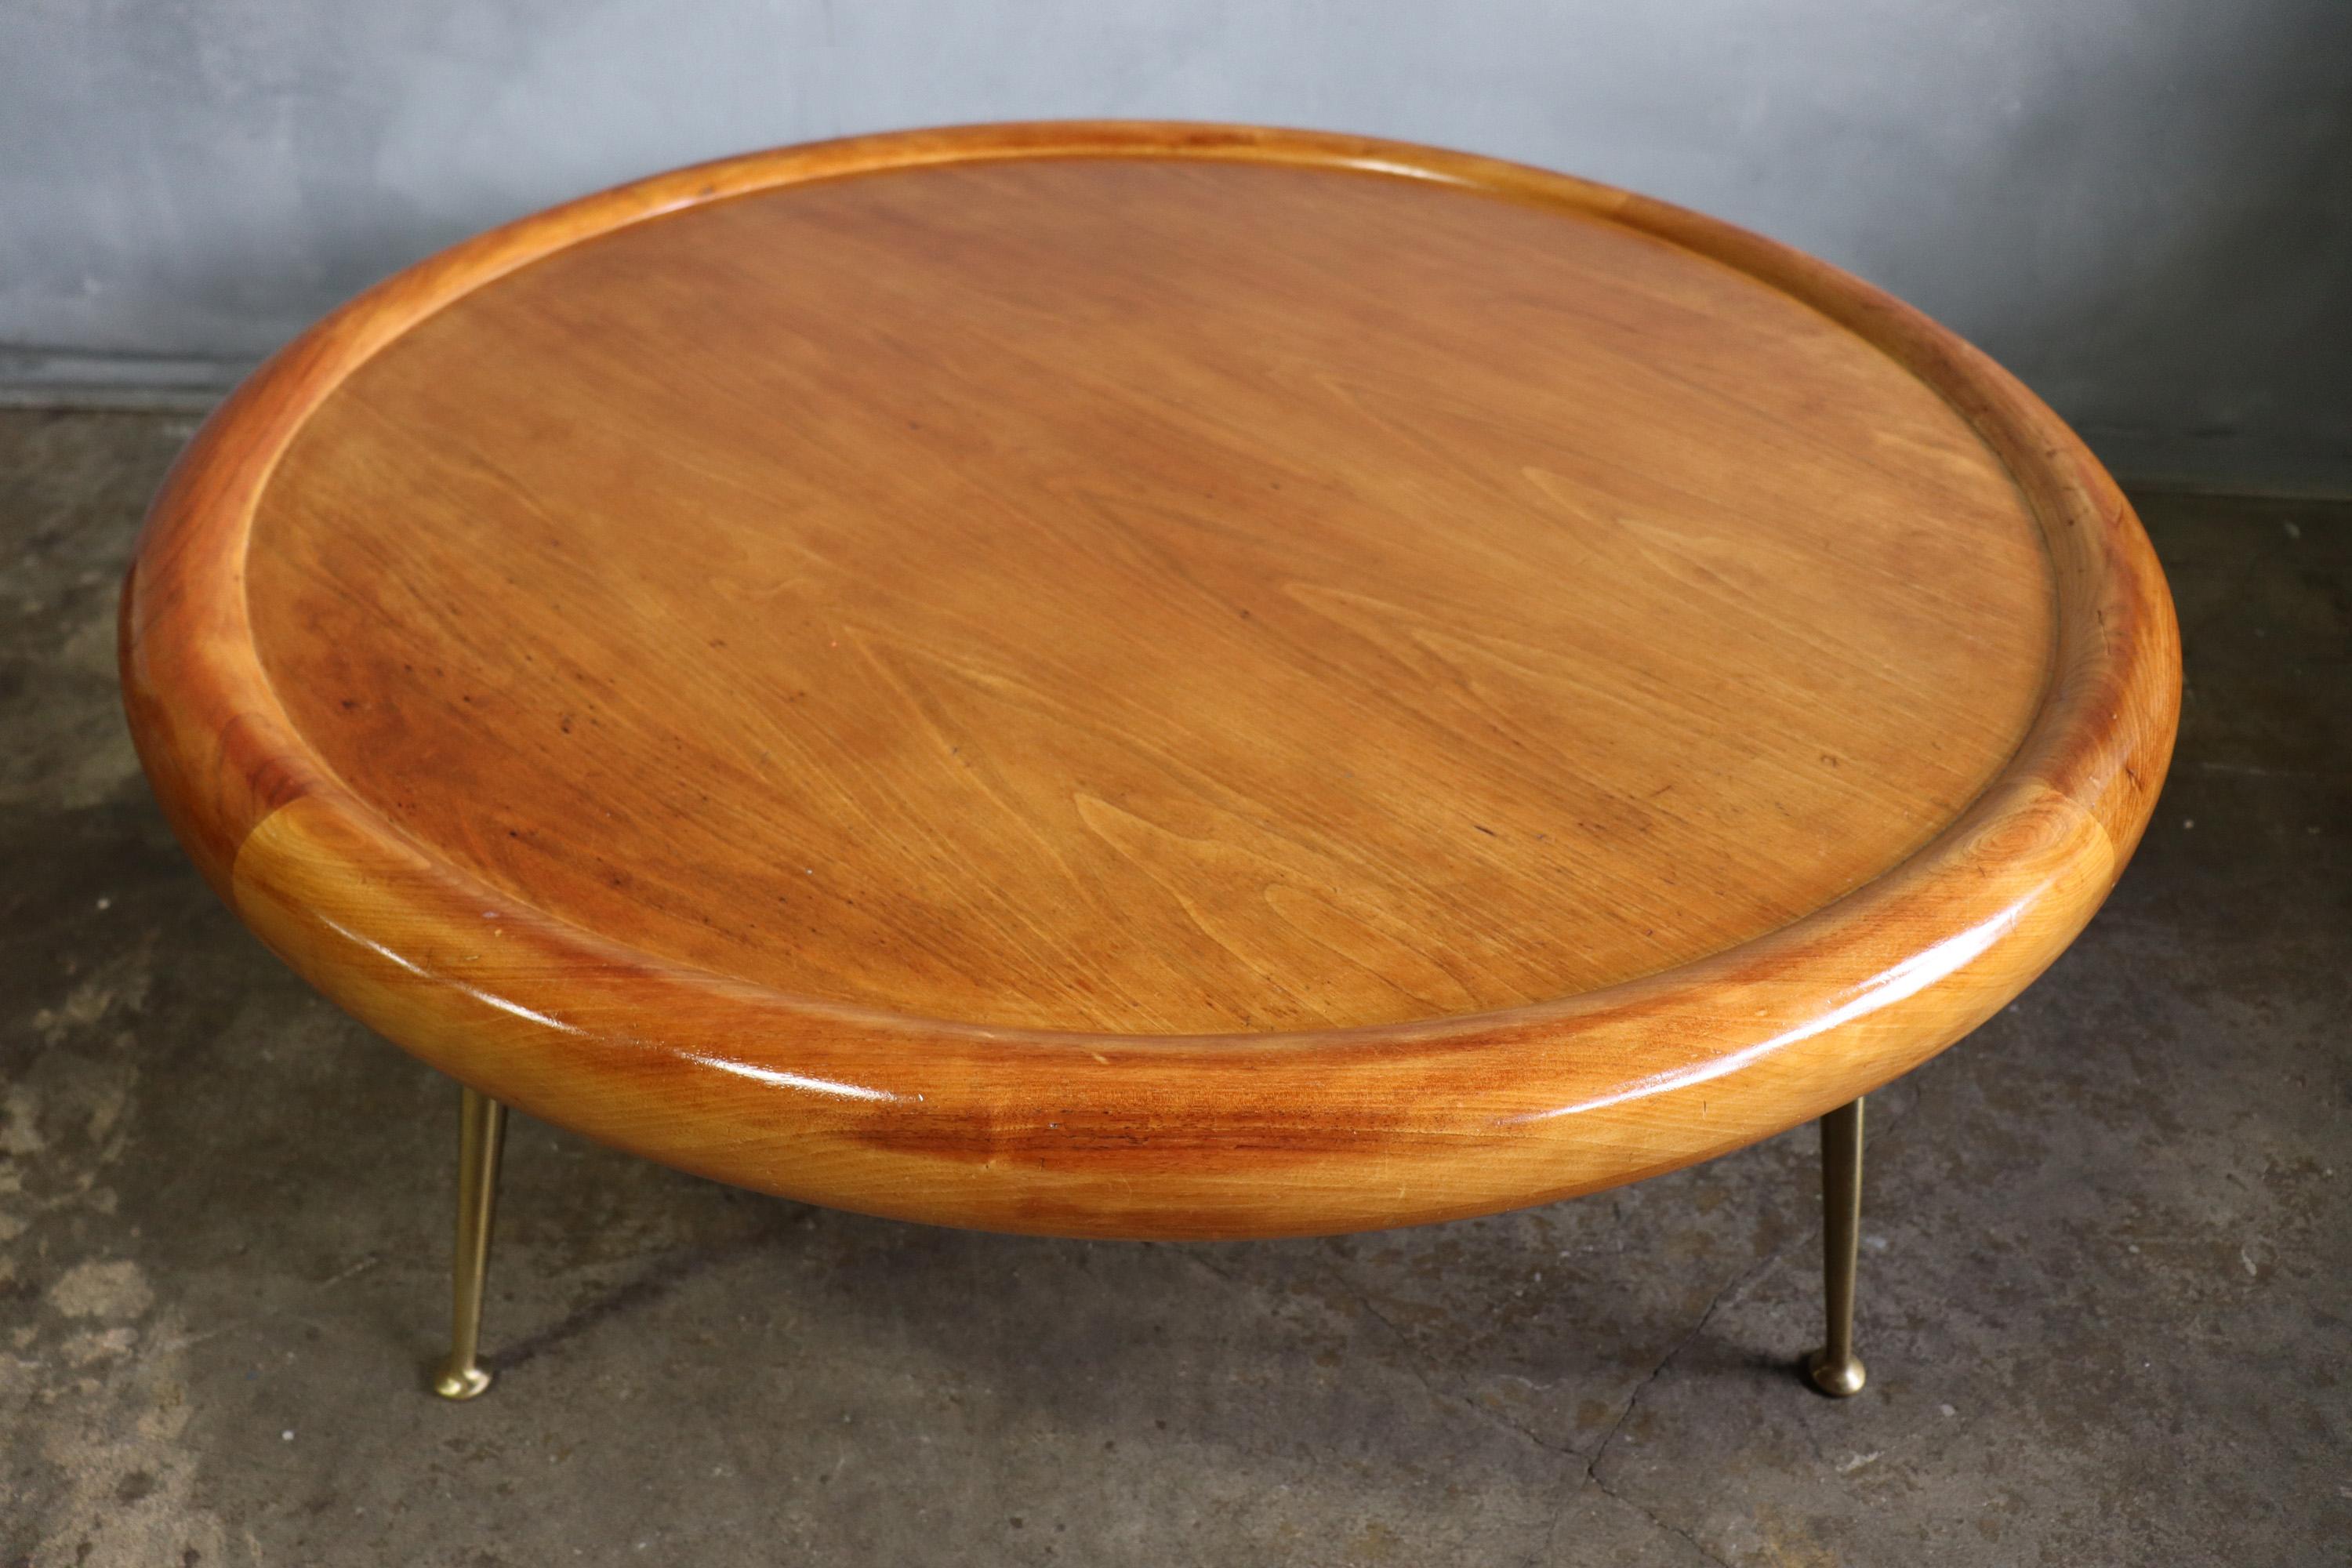 20th Century Midcentury Coffeel Table by T.H. Robsjohn-Gibbings for Widdicomb For Sale